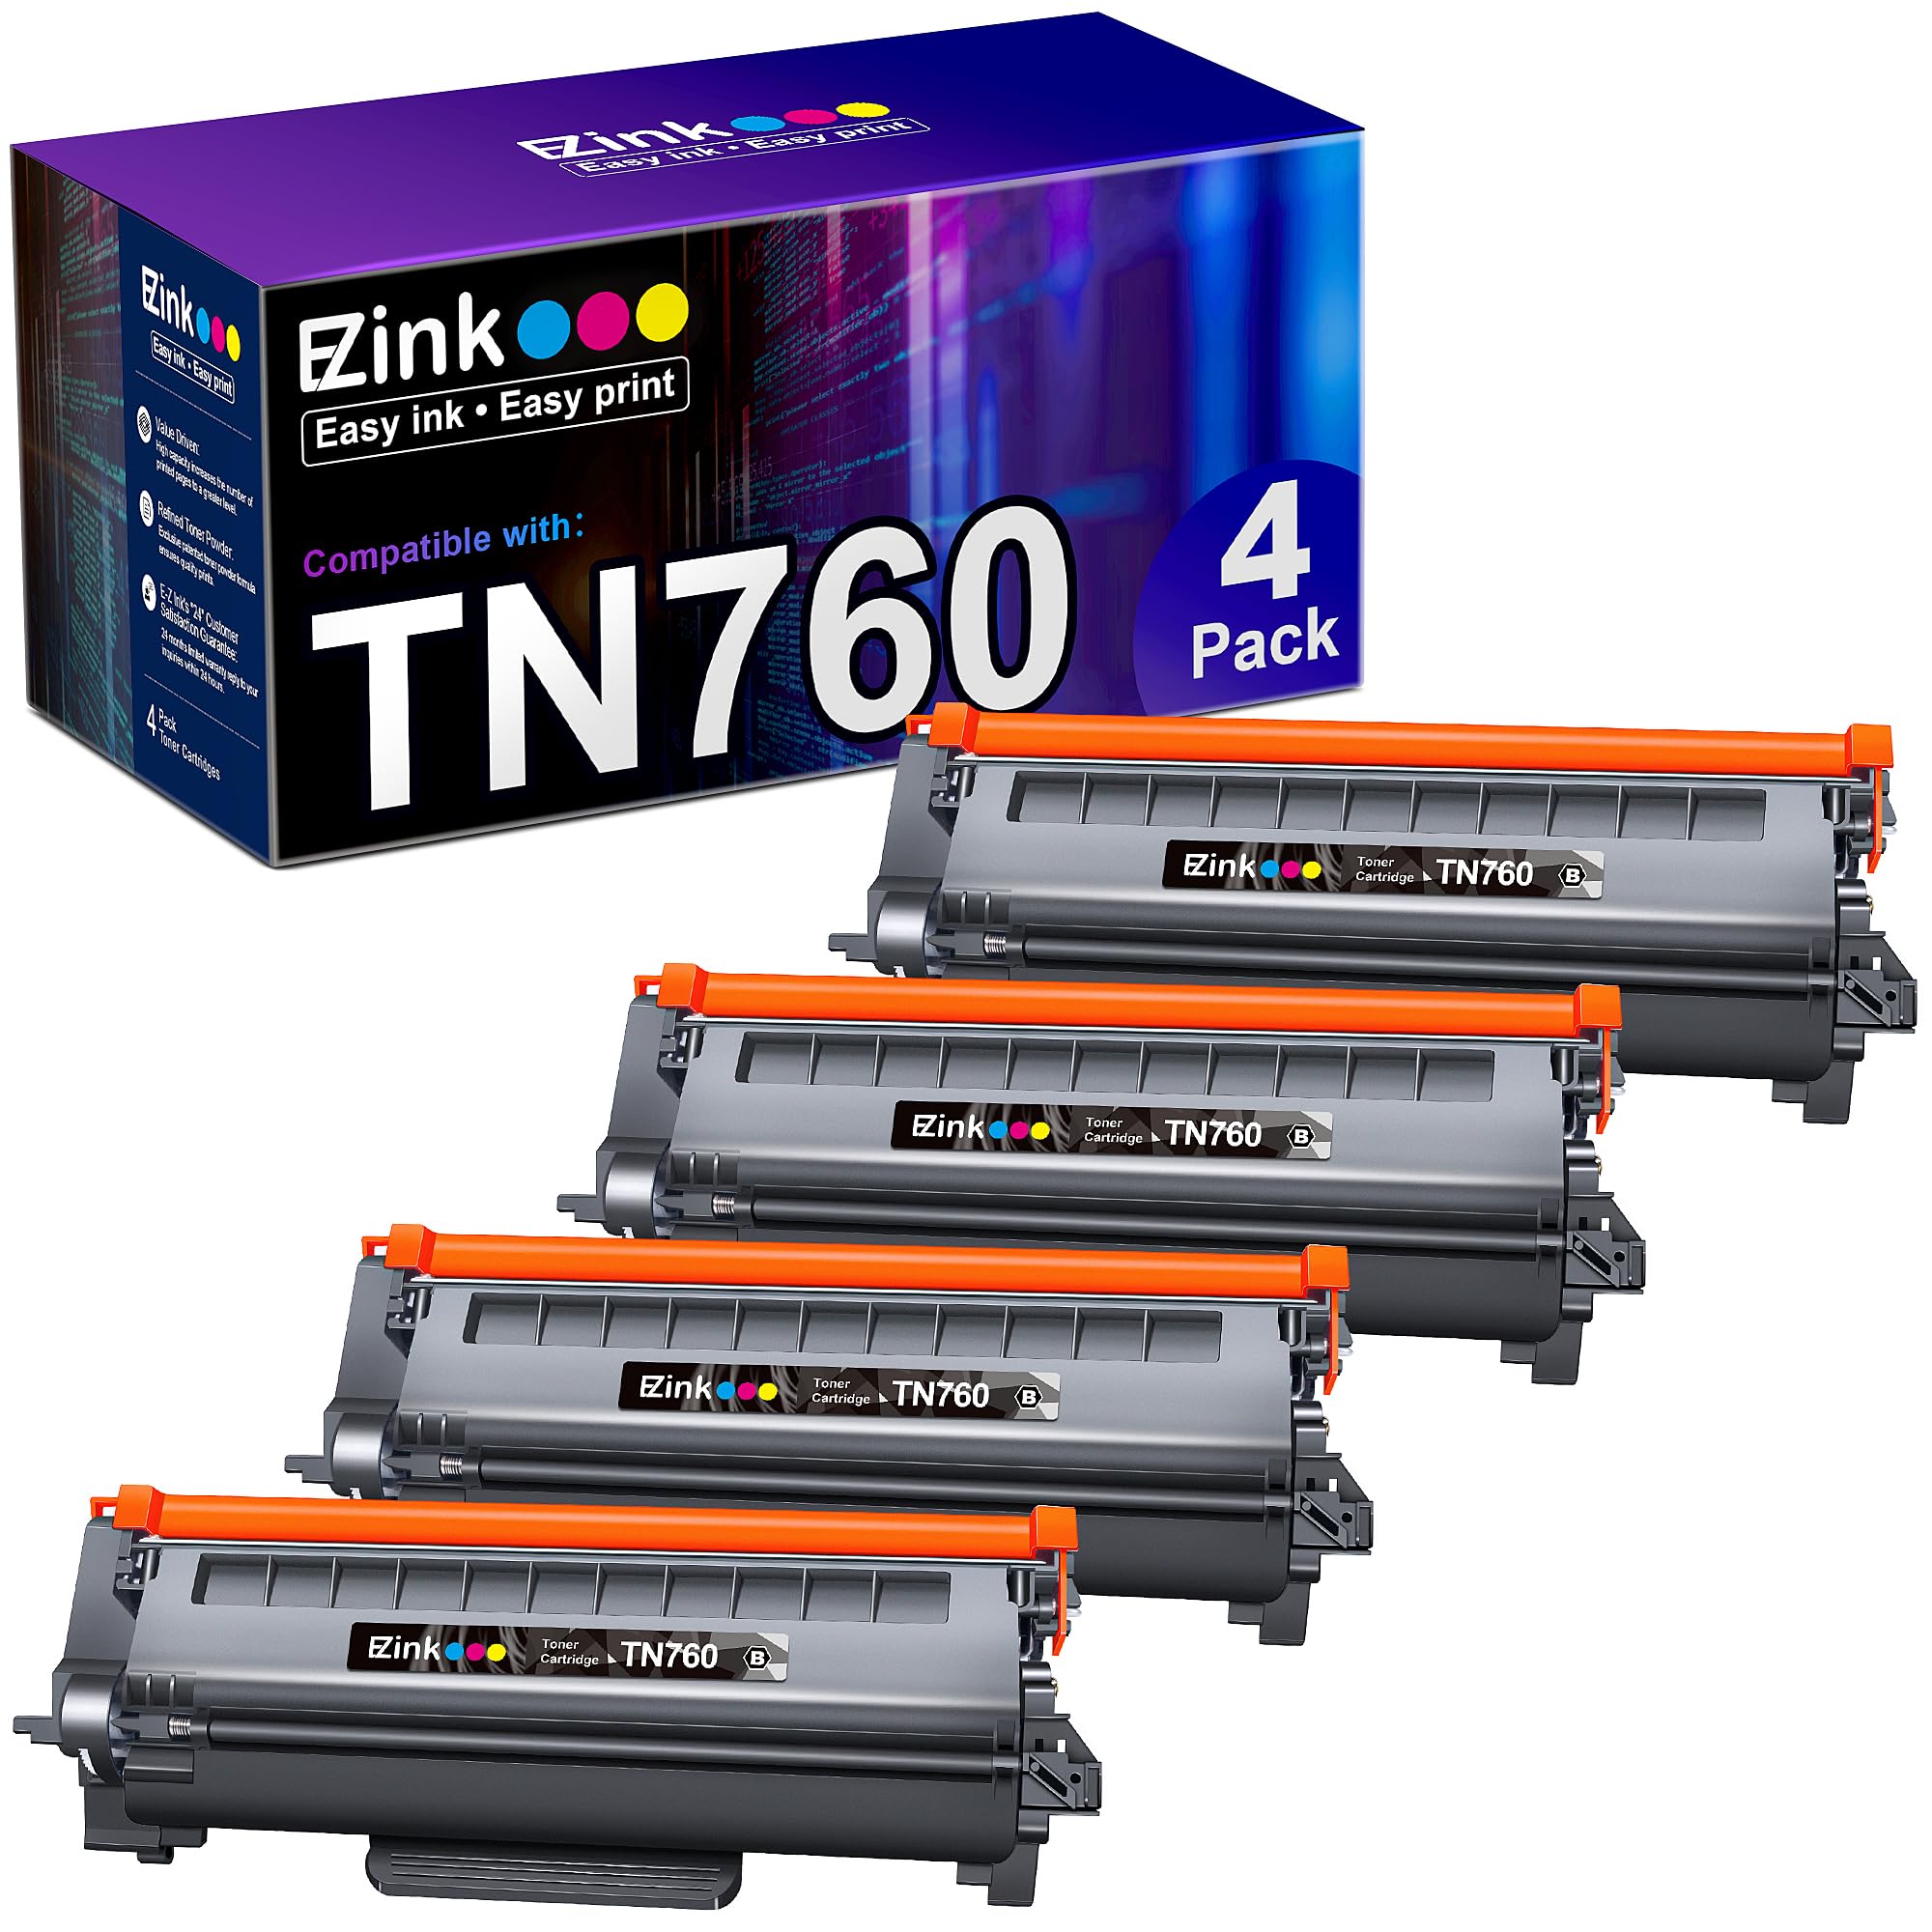 E-Z Ink (TM Compatible TN760 Toner Cartridges Replacement for Brother TN-760 TN730 TN-730 to Use with HL-L2350DW HL-L2395DW HL-L2390DW HL-L2370DW MFC-L2750DW MFC-L2710DW DCP-L2550DW (Black, 4 Pack)